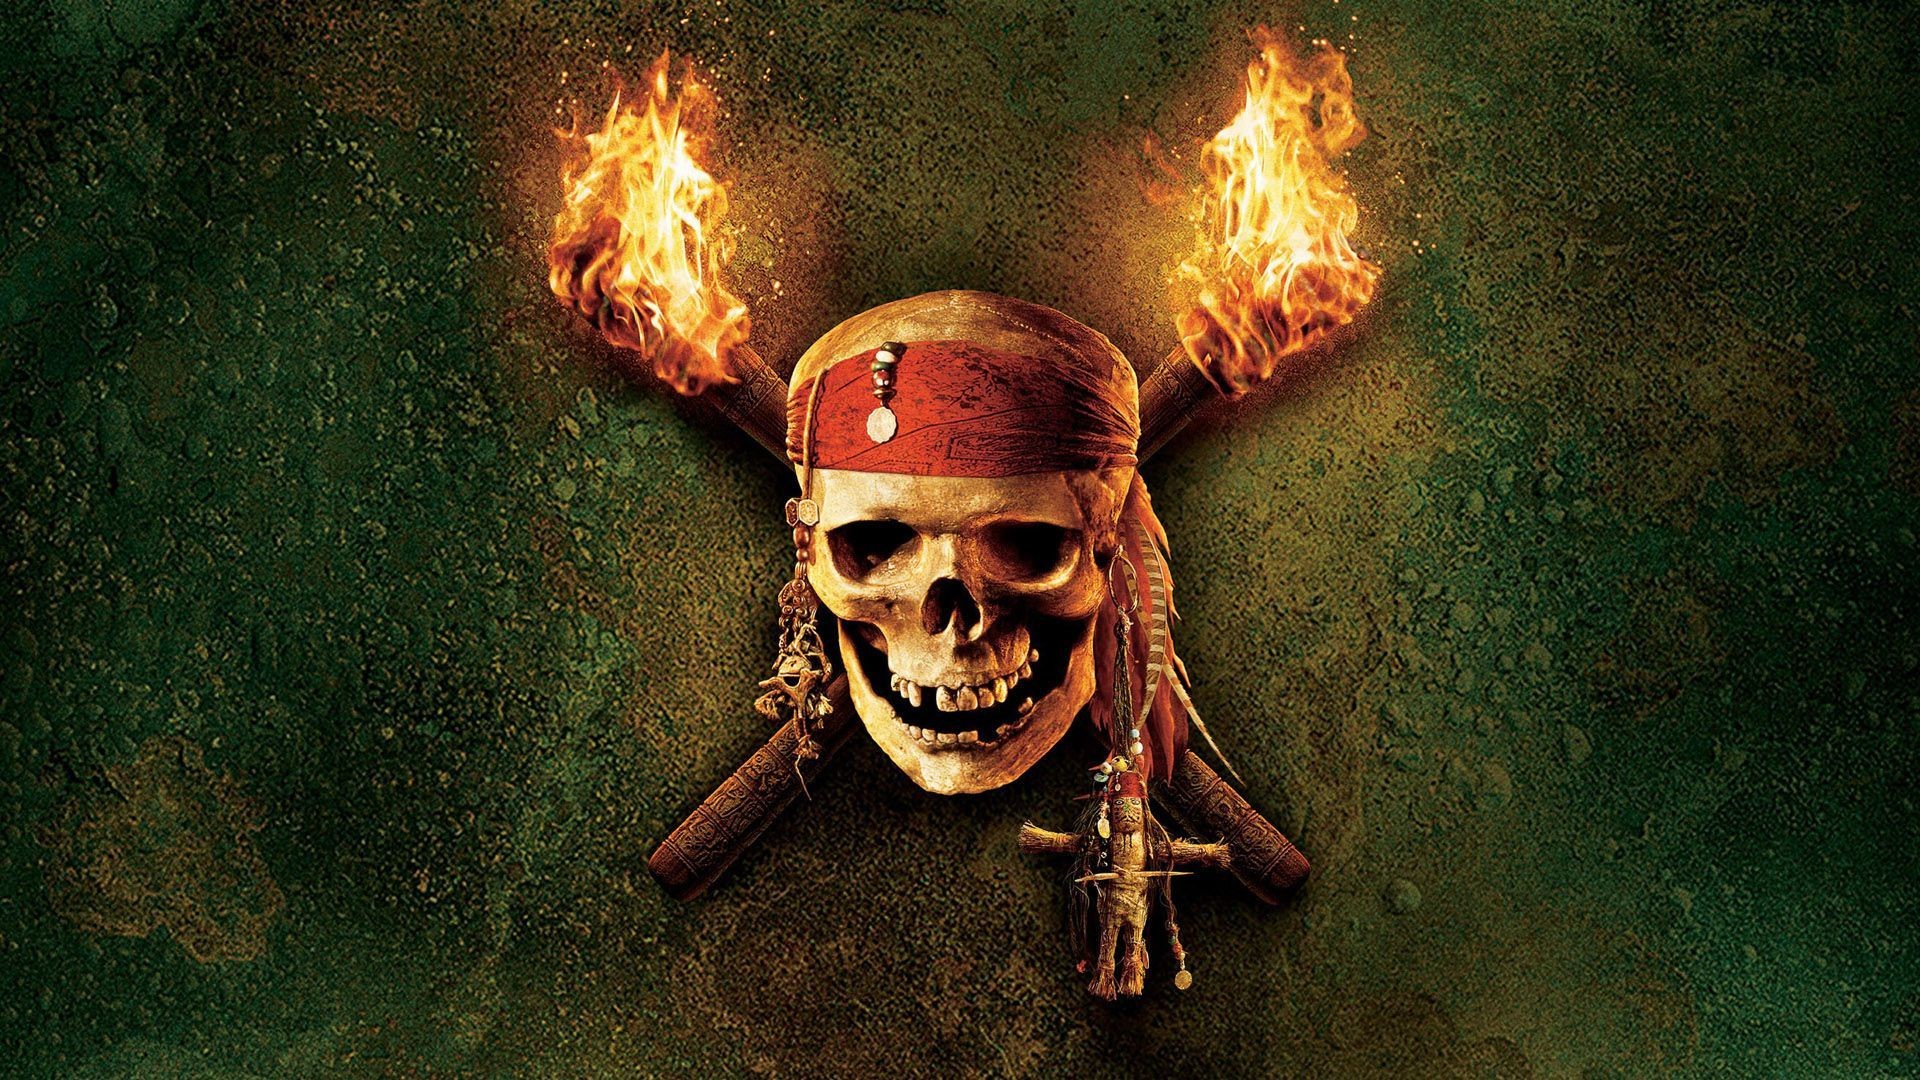 1920x1080 Pirates of the Caribbean Wallpapers